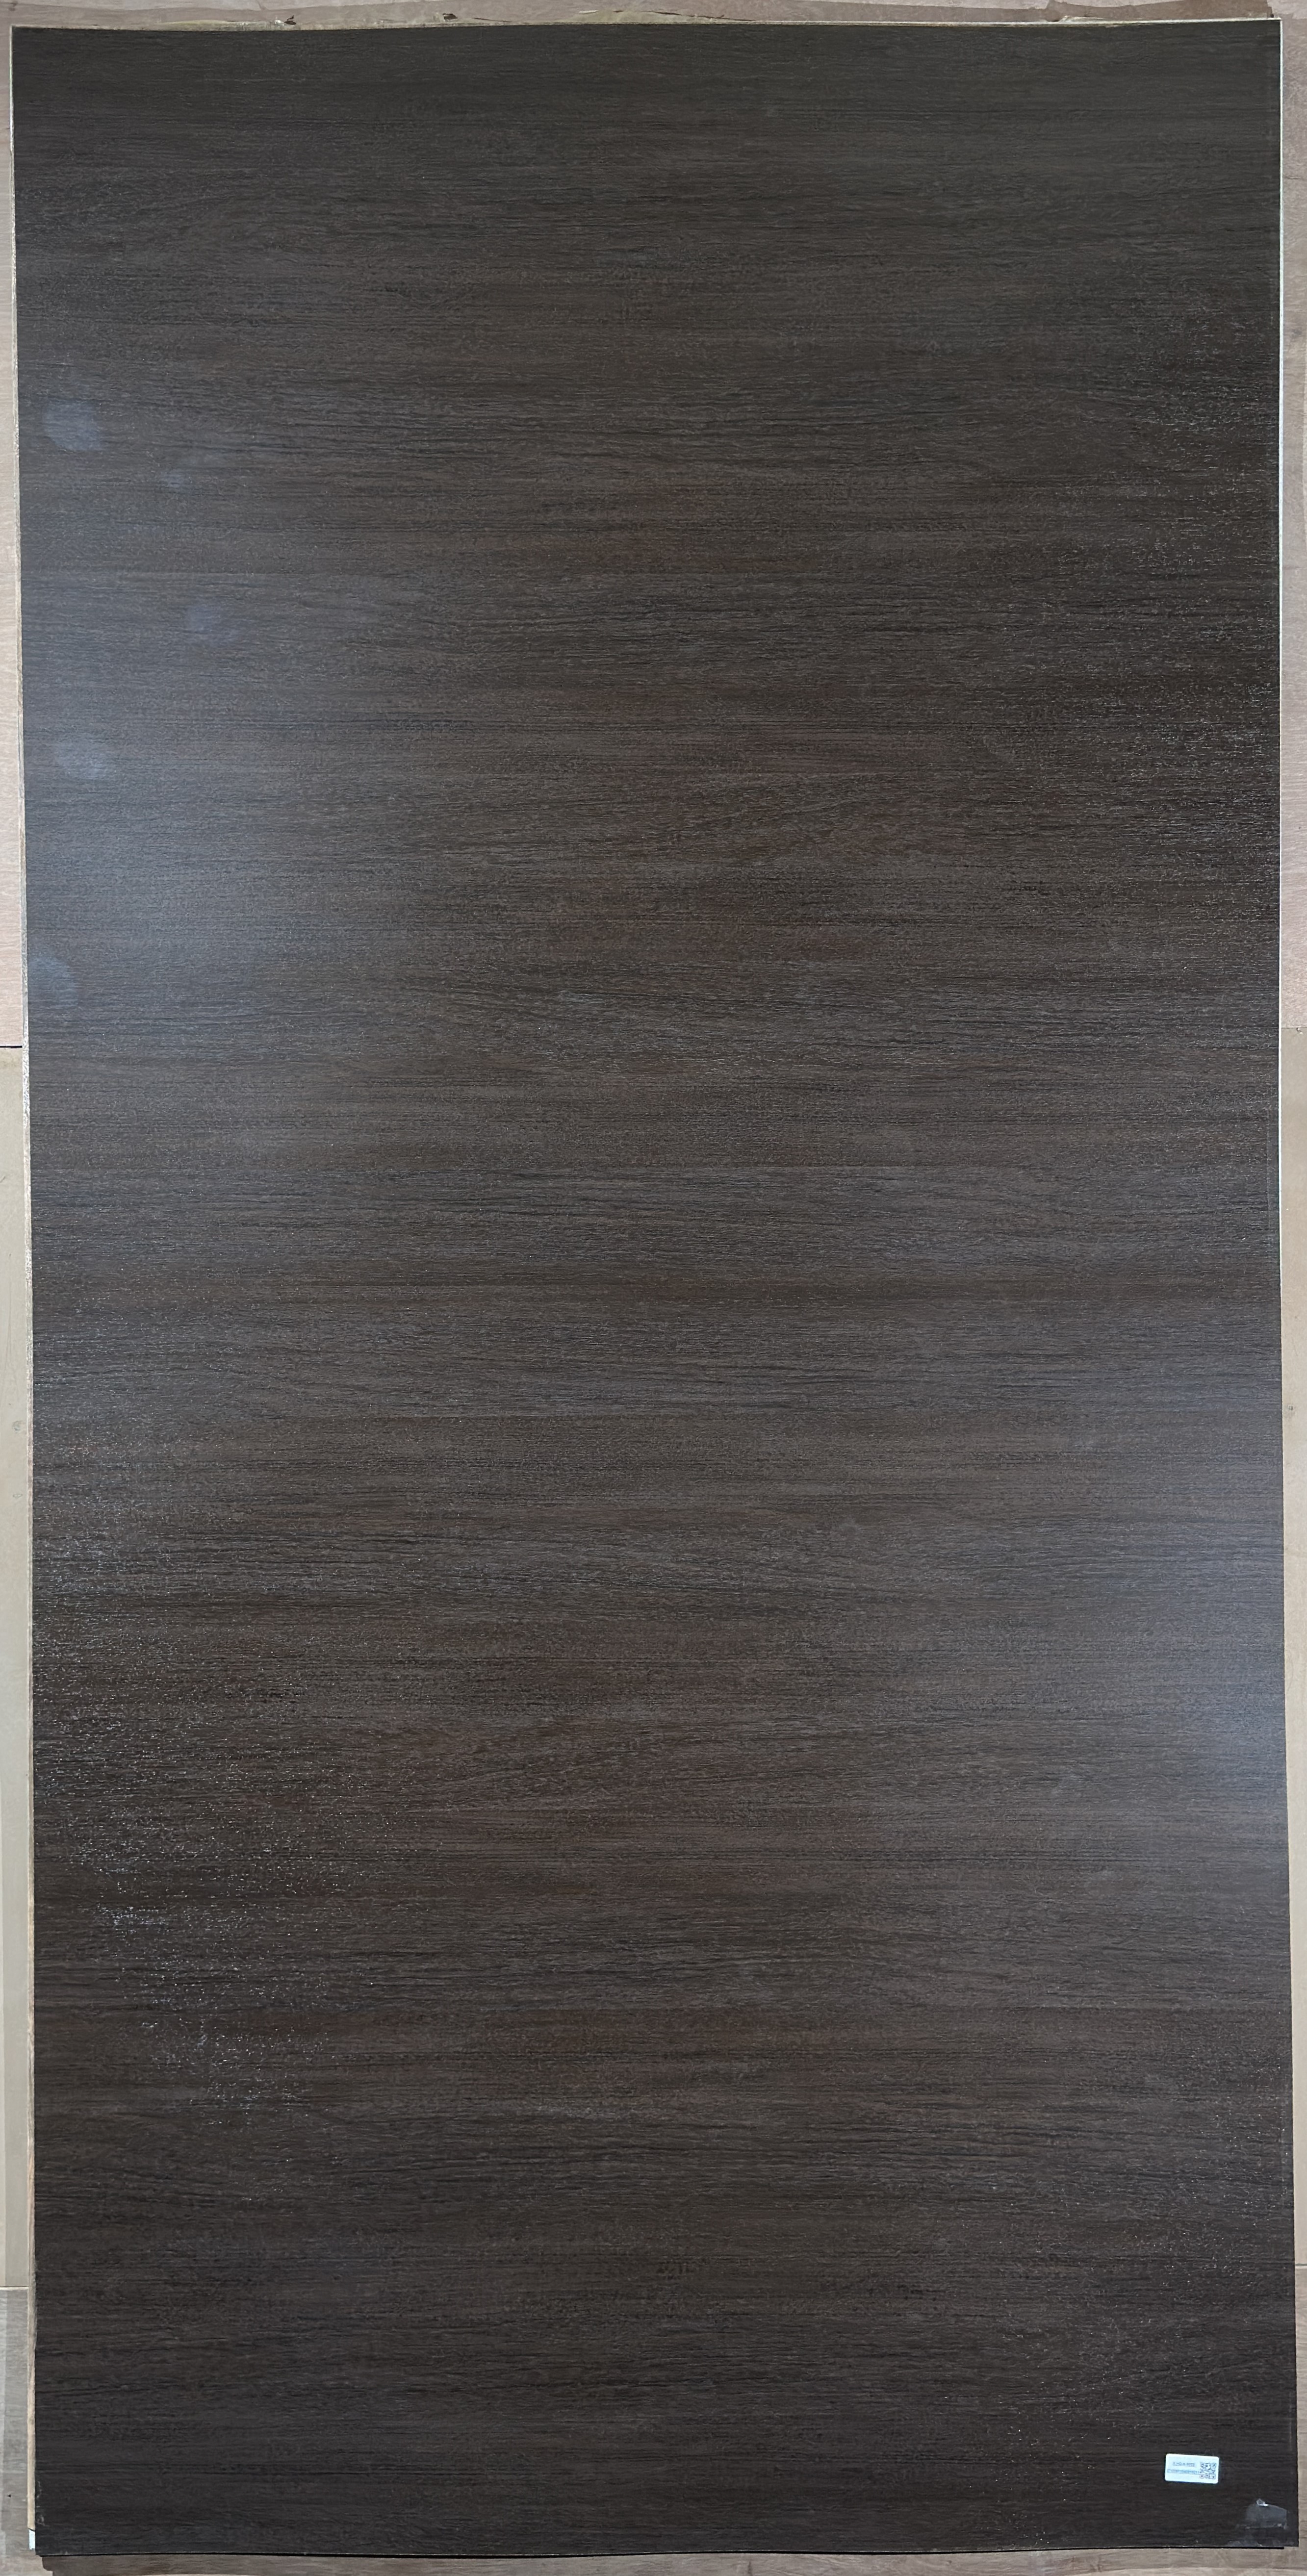 Material Depot laminates in bangalore - high quality image of a 87058 HO Brown Decorative Laminate from Pulp Decor with Texture finish